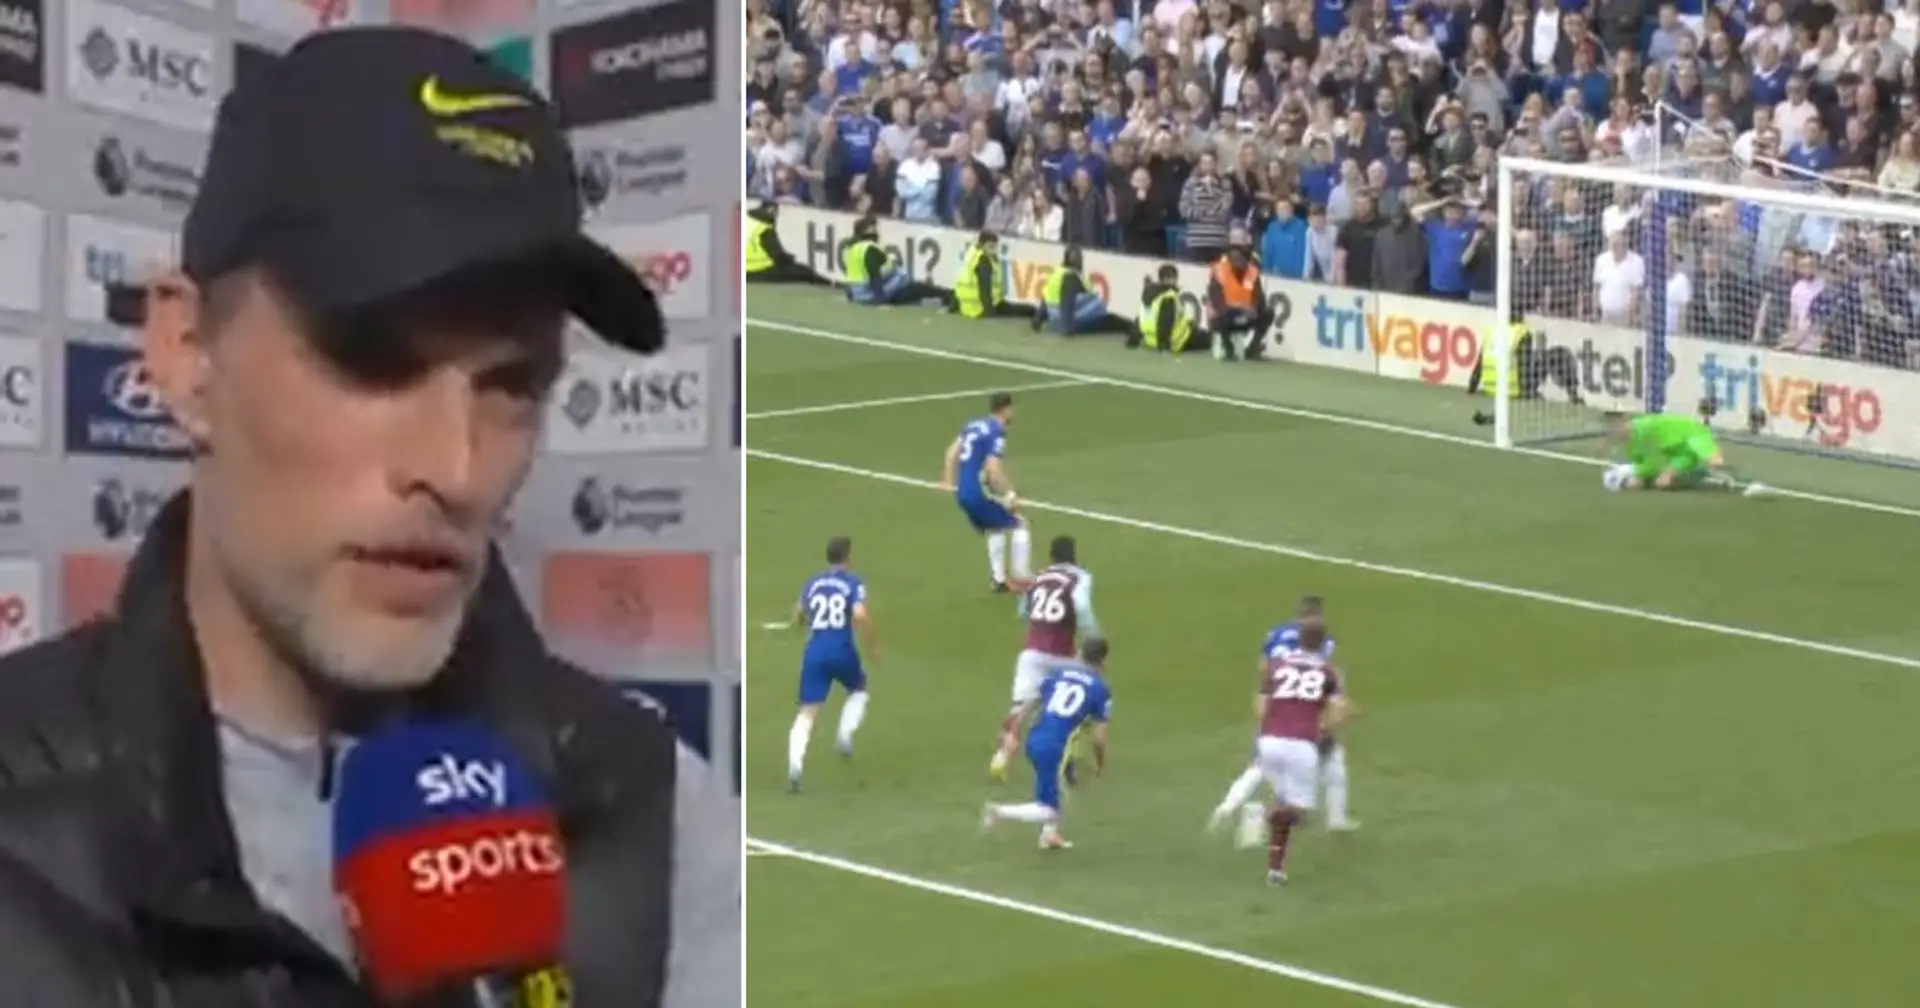 'Jorginho is right to stick to his style': Tuchel reacts to missed penalty v West Ham